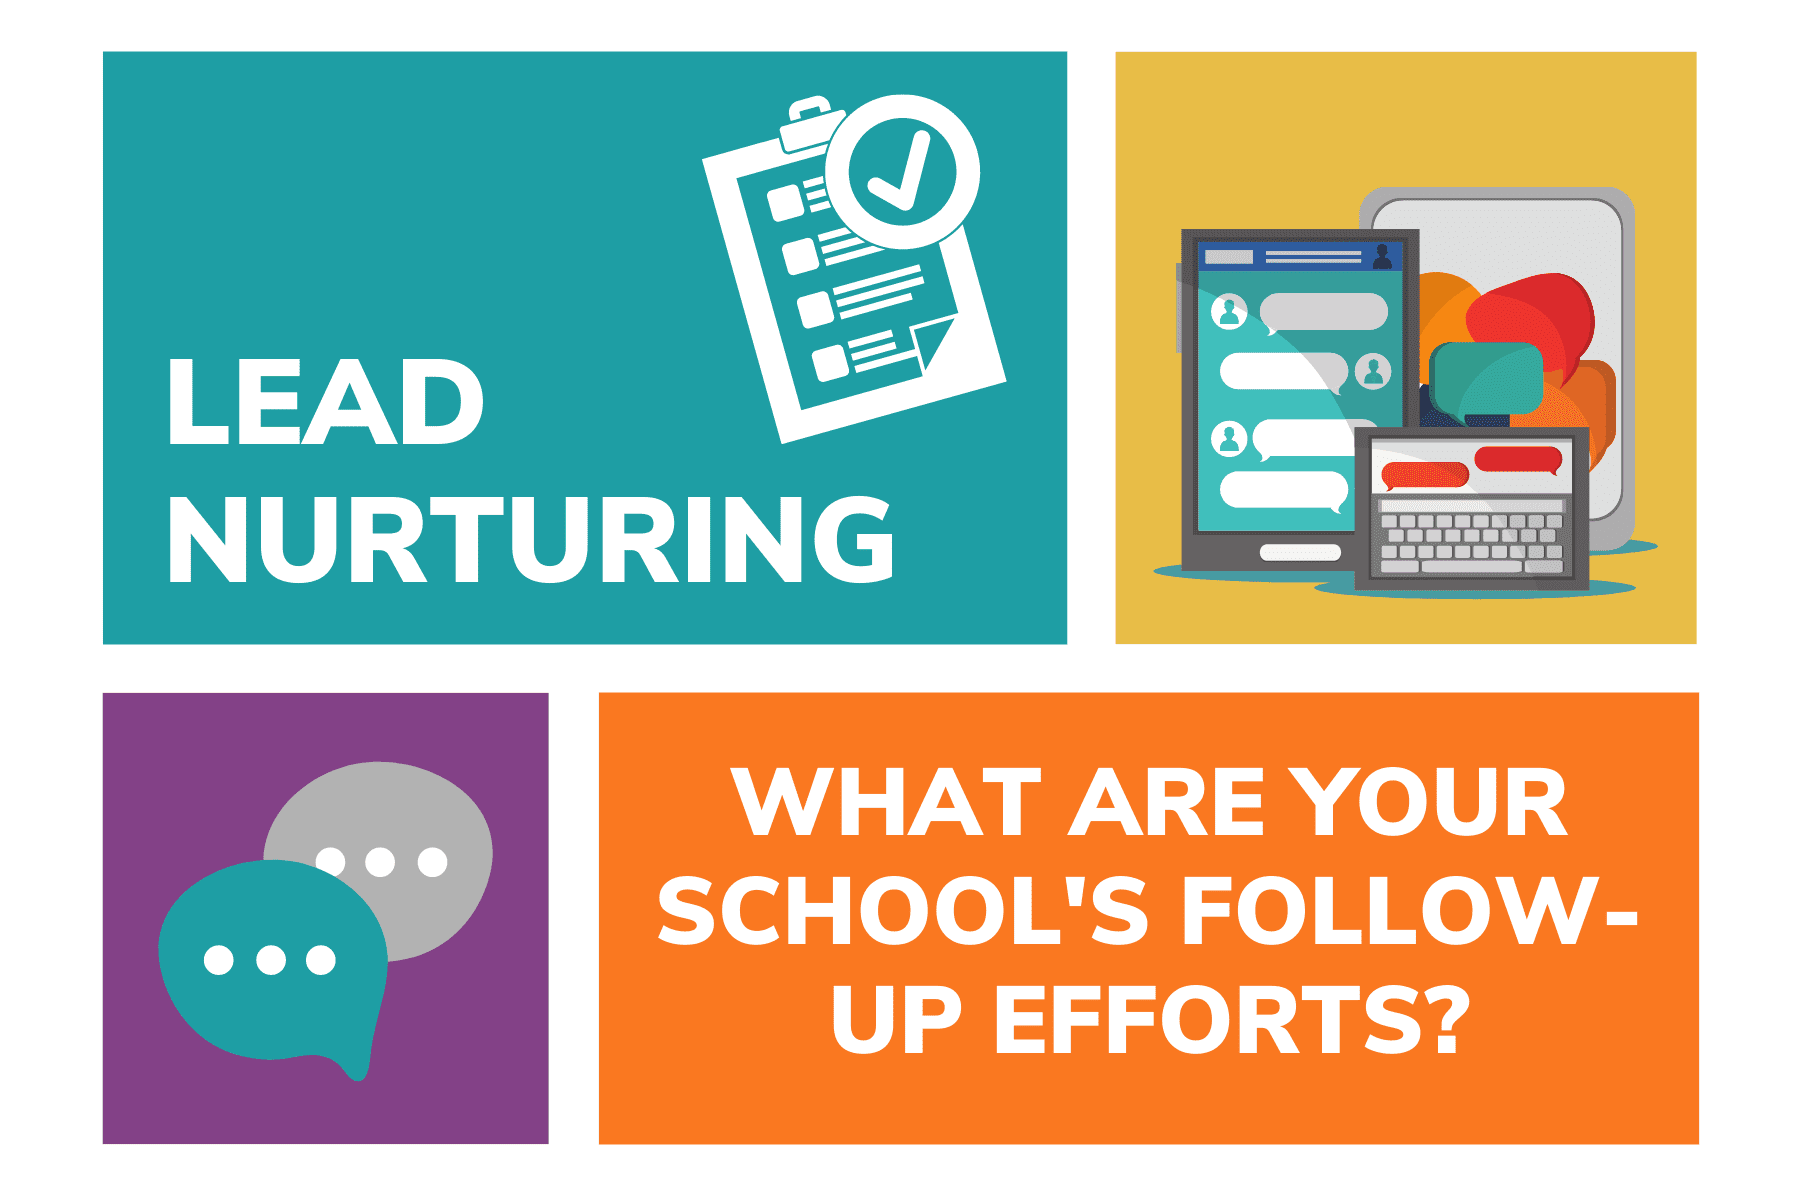 Lead nurturing: What are your school's follow up efforts?